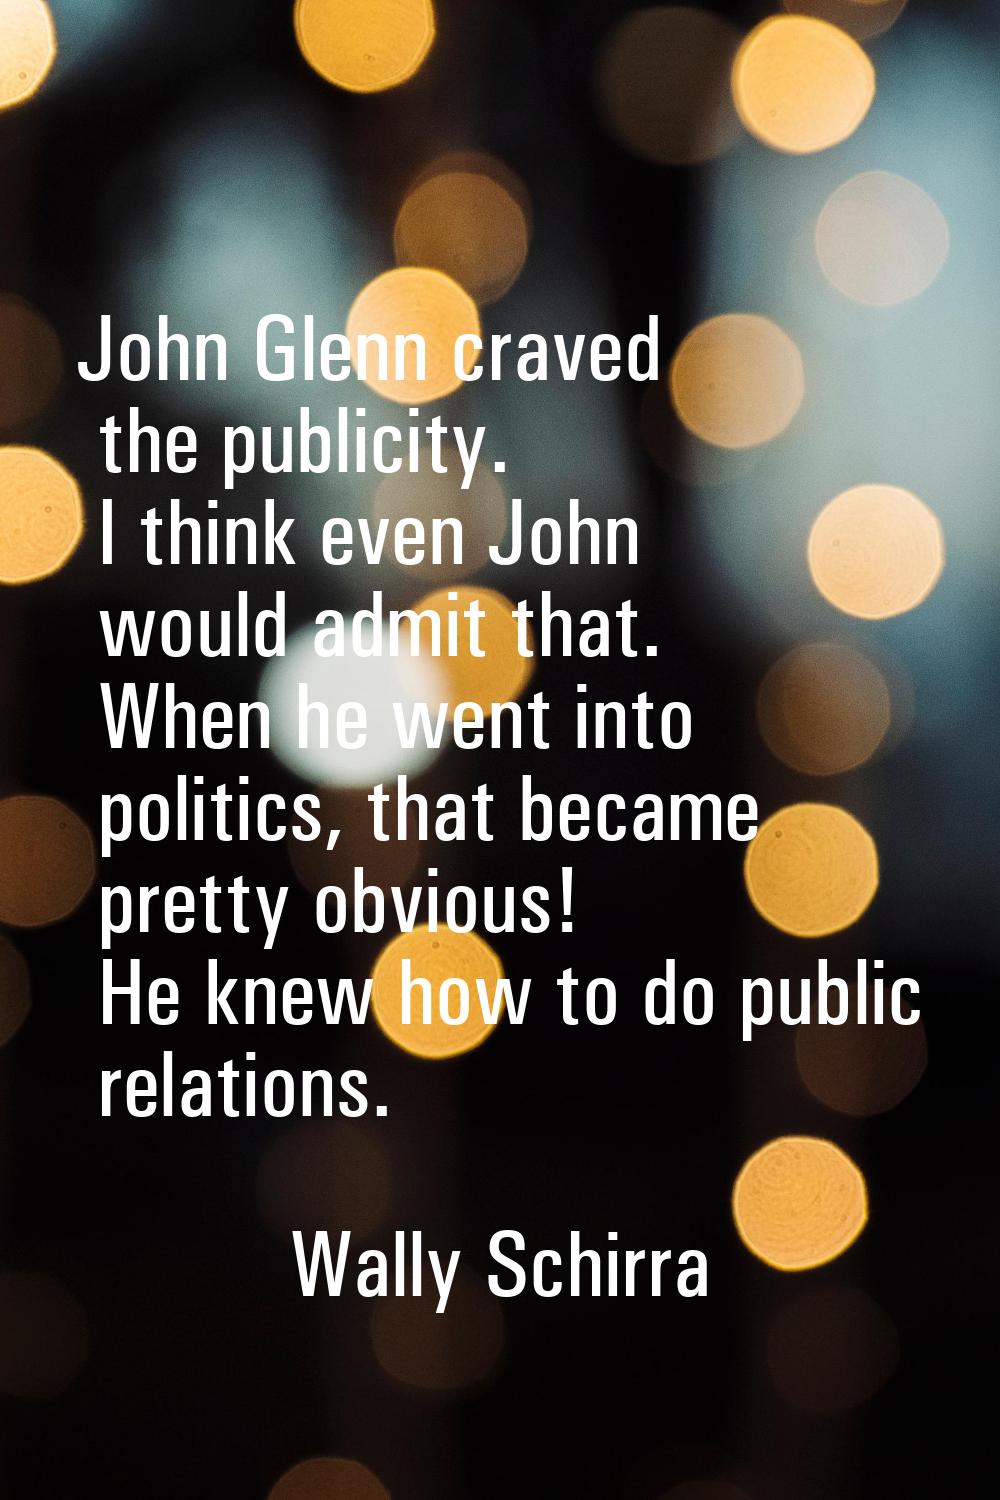 John Glenn craved the publicity. I think even John would admit that. When he went into politics, th